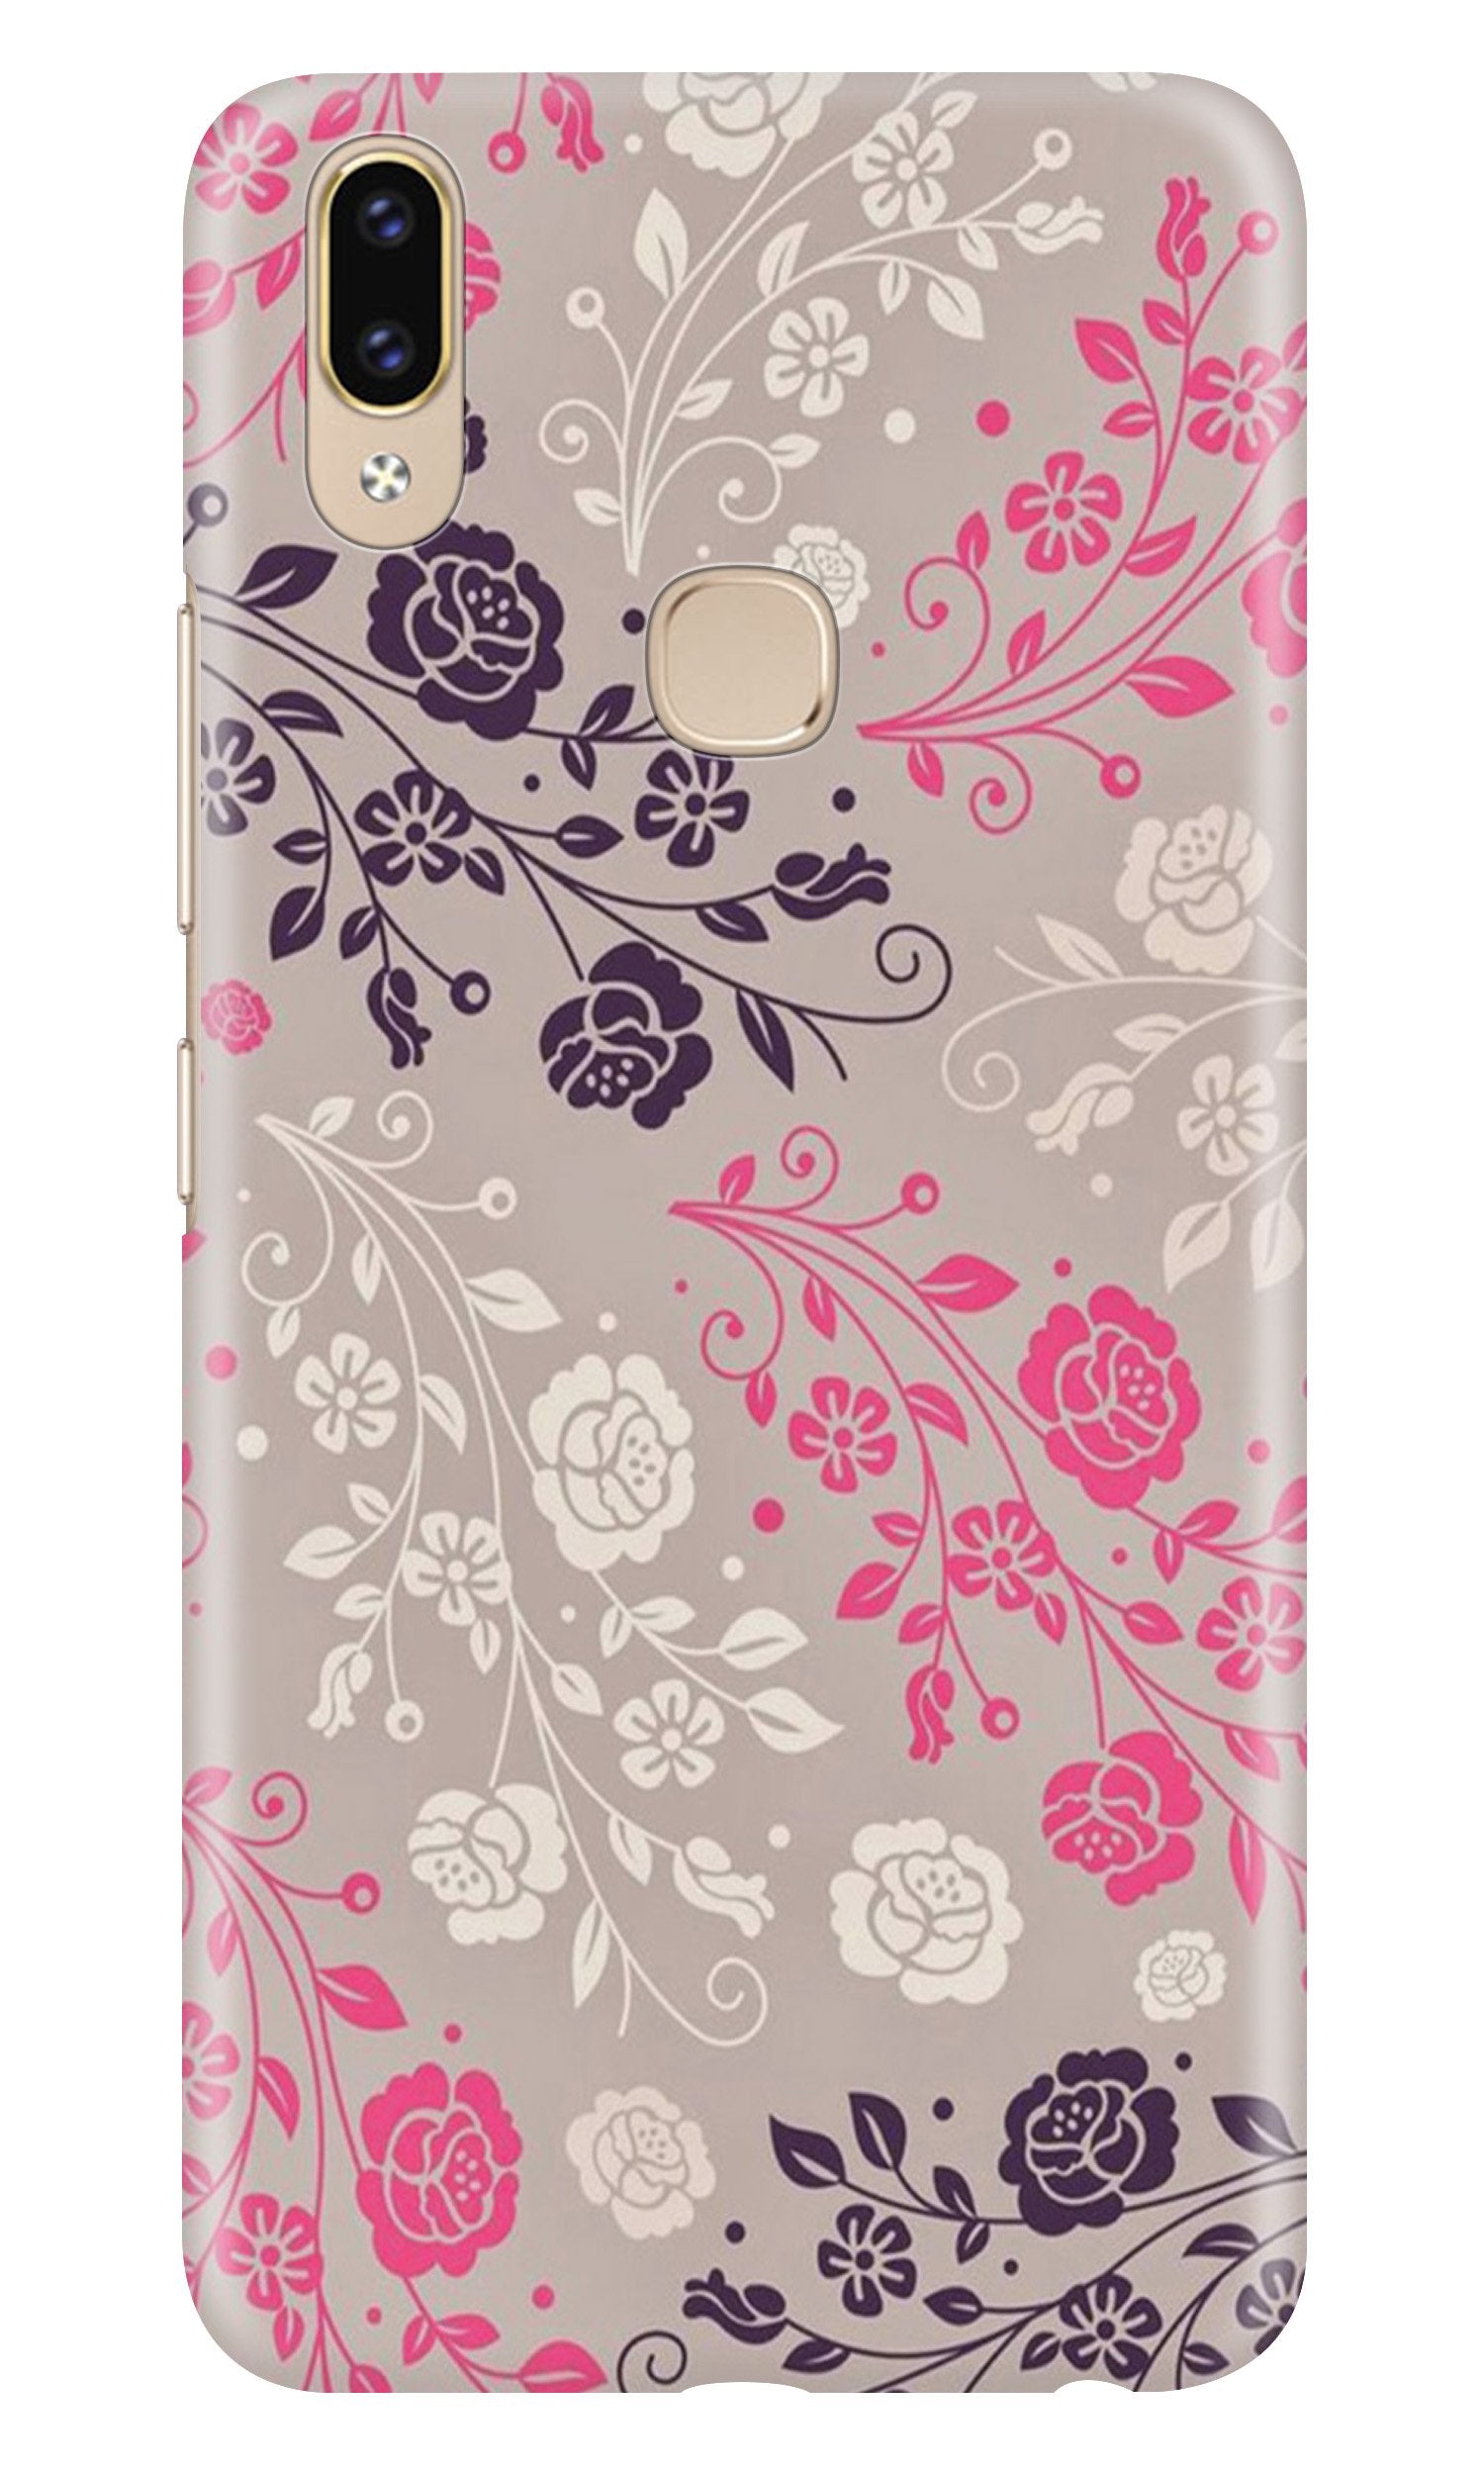 Pattern2 Case for Asus Zenfone Max M2